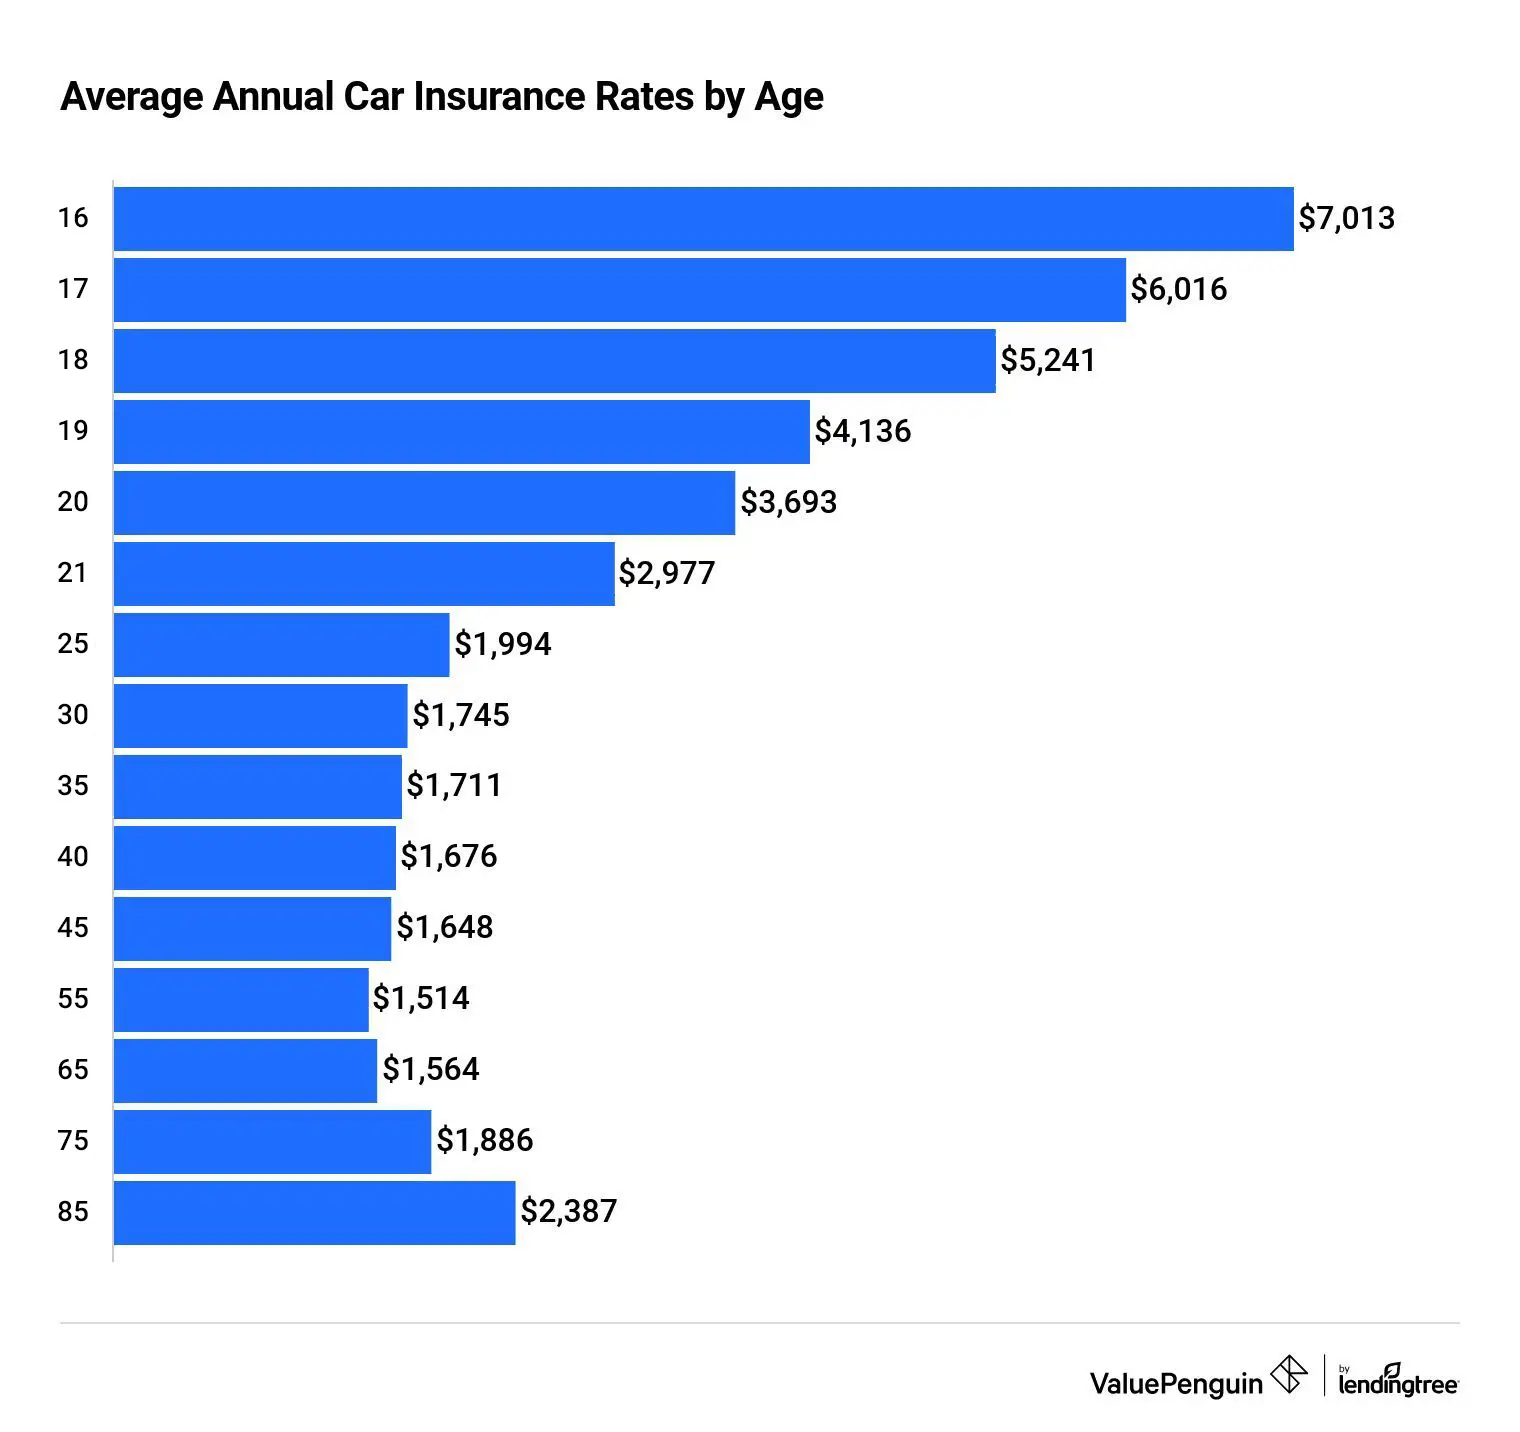 Average Annual Car Insurance Rates by Age